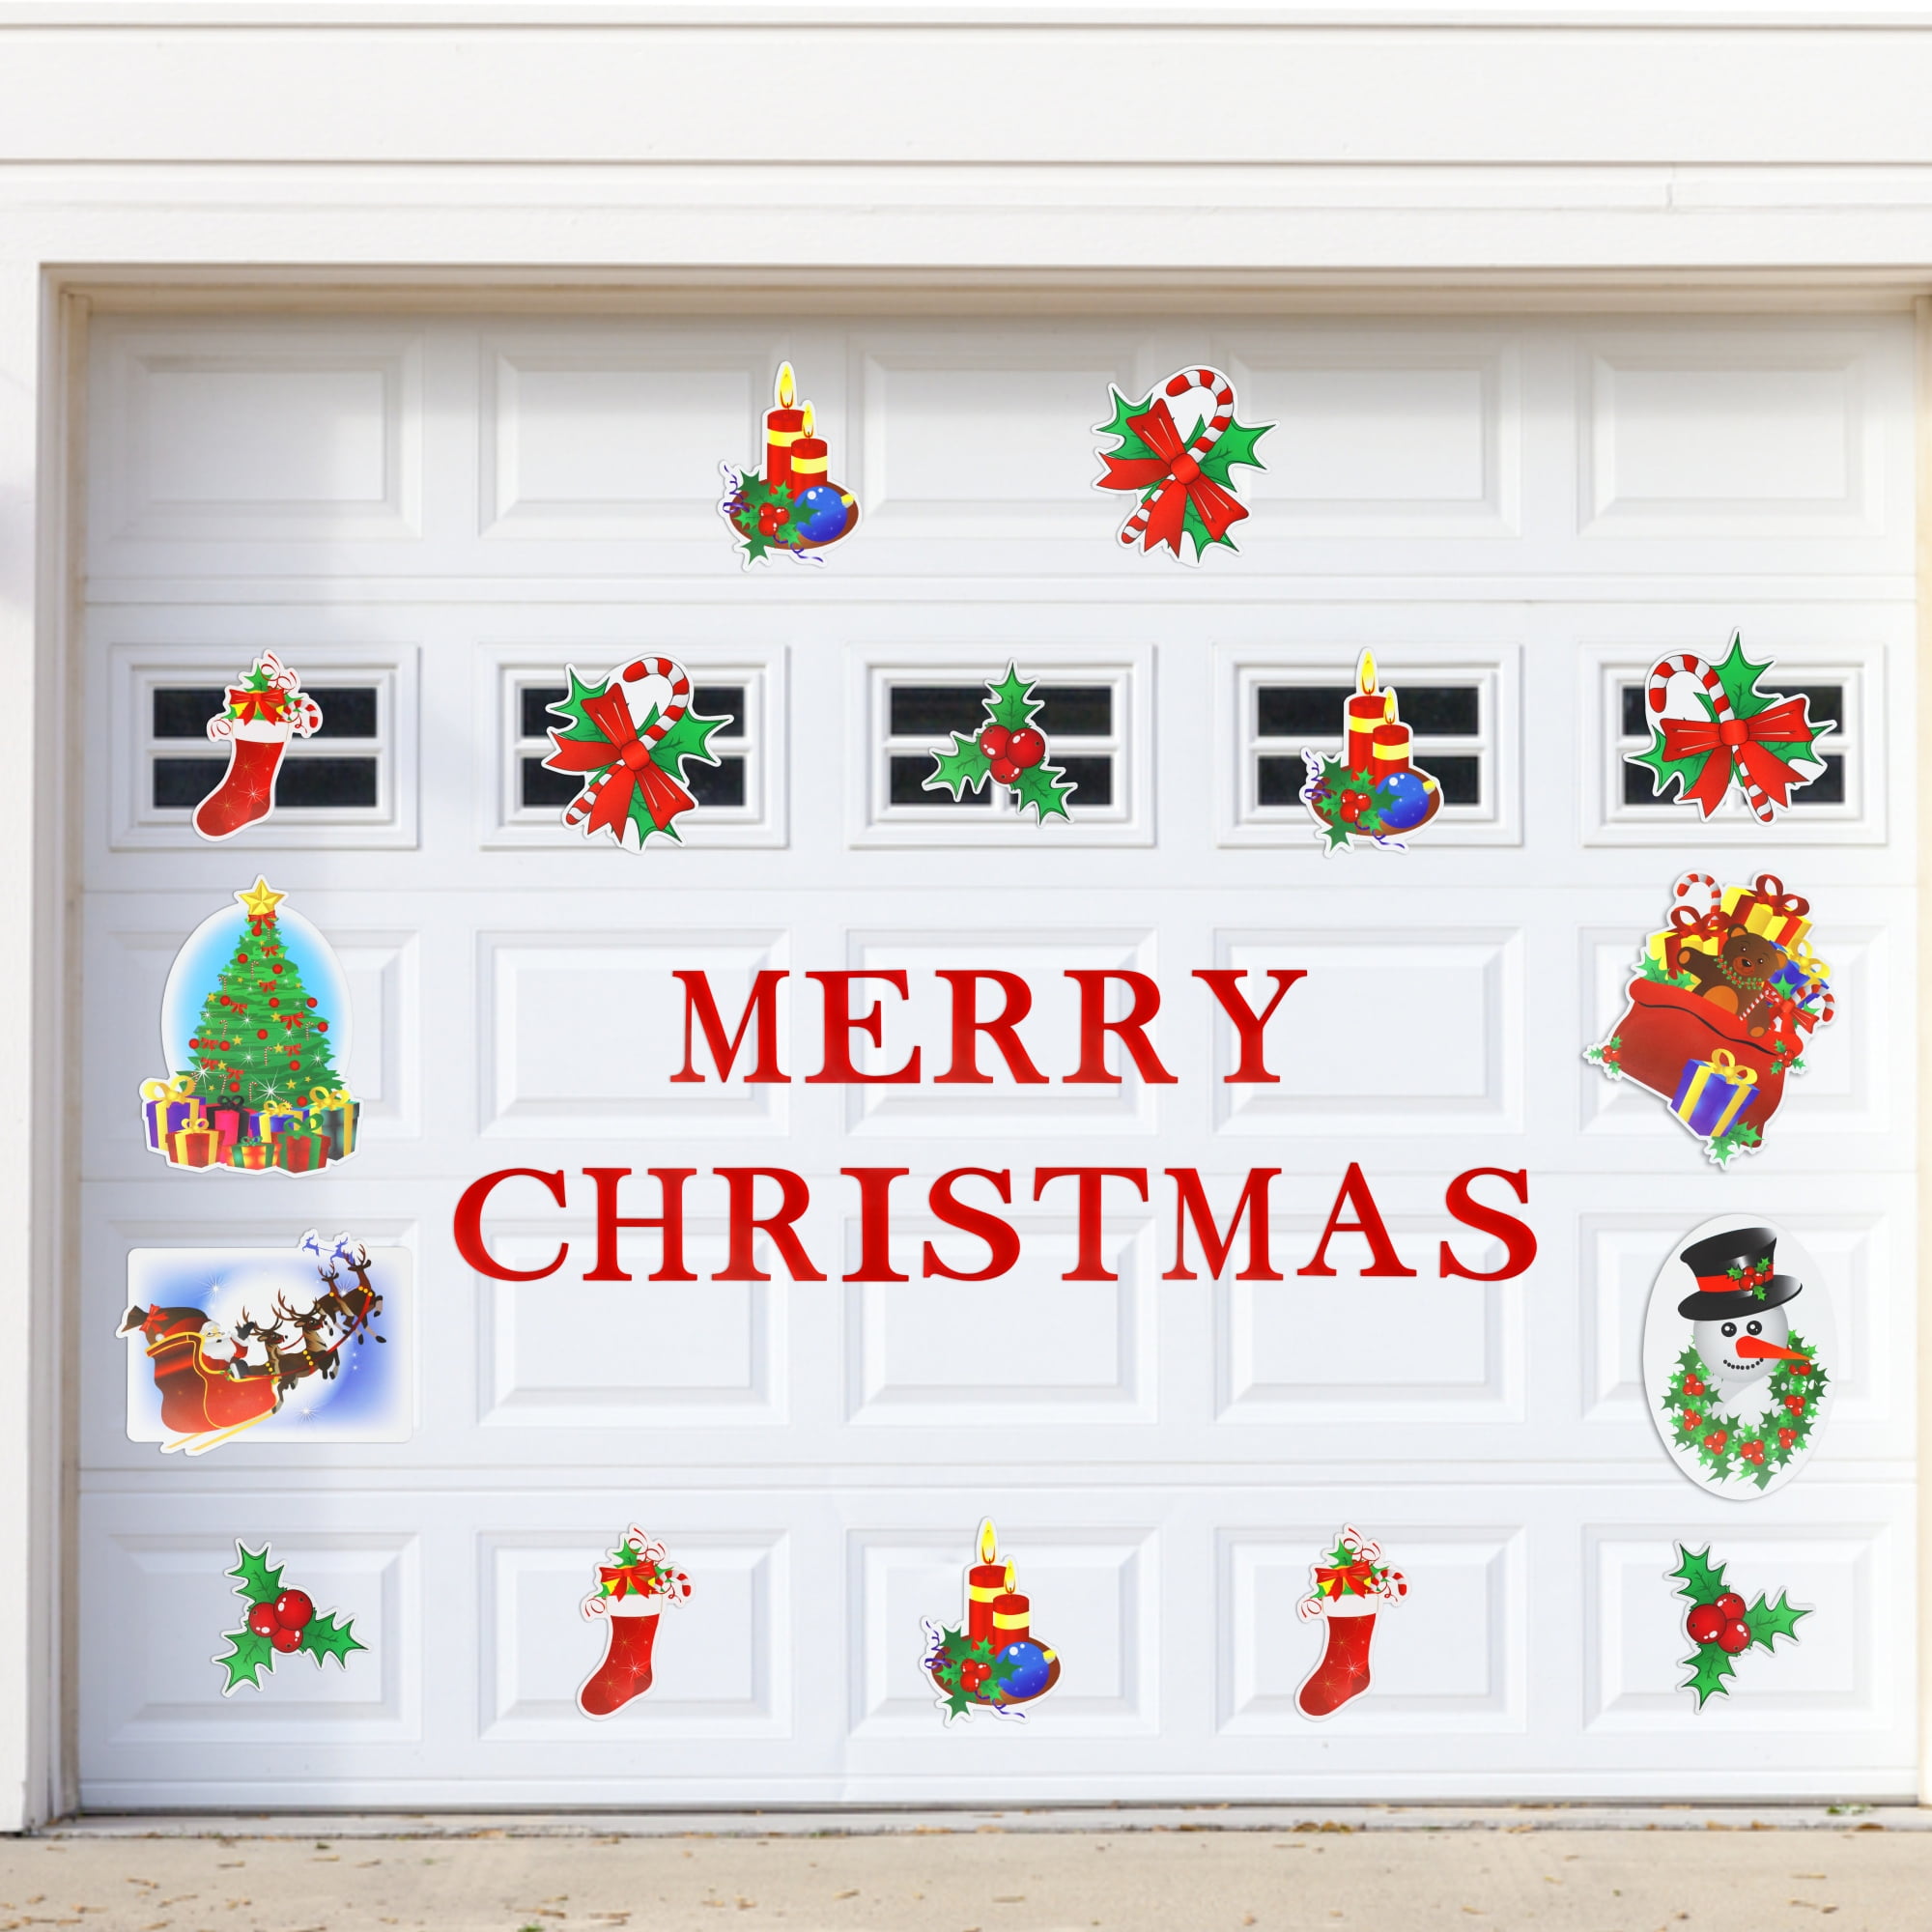 30Pcs All in One Christmas Garage Door Decorations Set Holiday and Christmas Home Decor Garage Christmas Decorations for Santa Decor Merry Christmas Garage Door Magnets Weather Resistant 